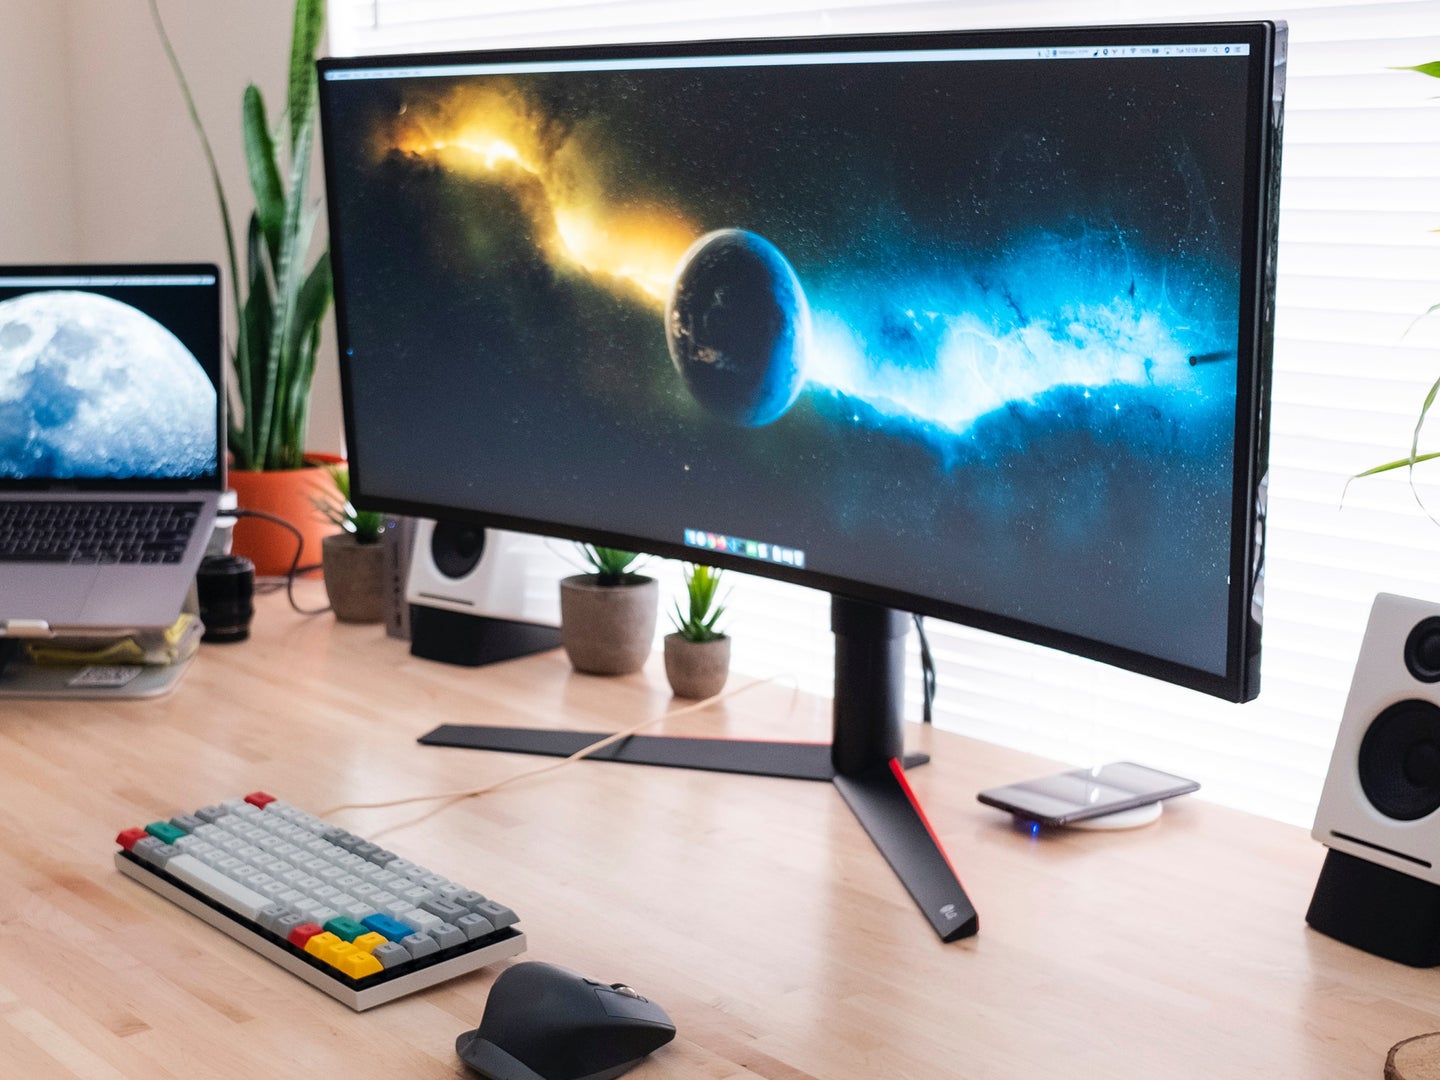 An ultrawide monitor on a wooden desk in front of a window.